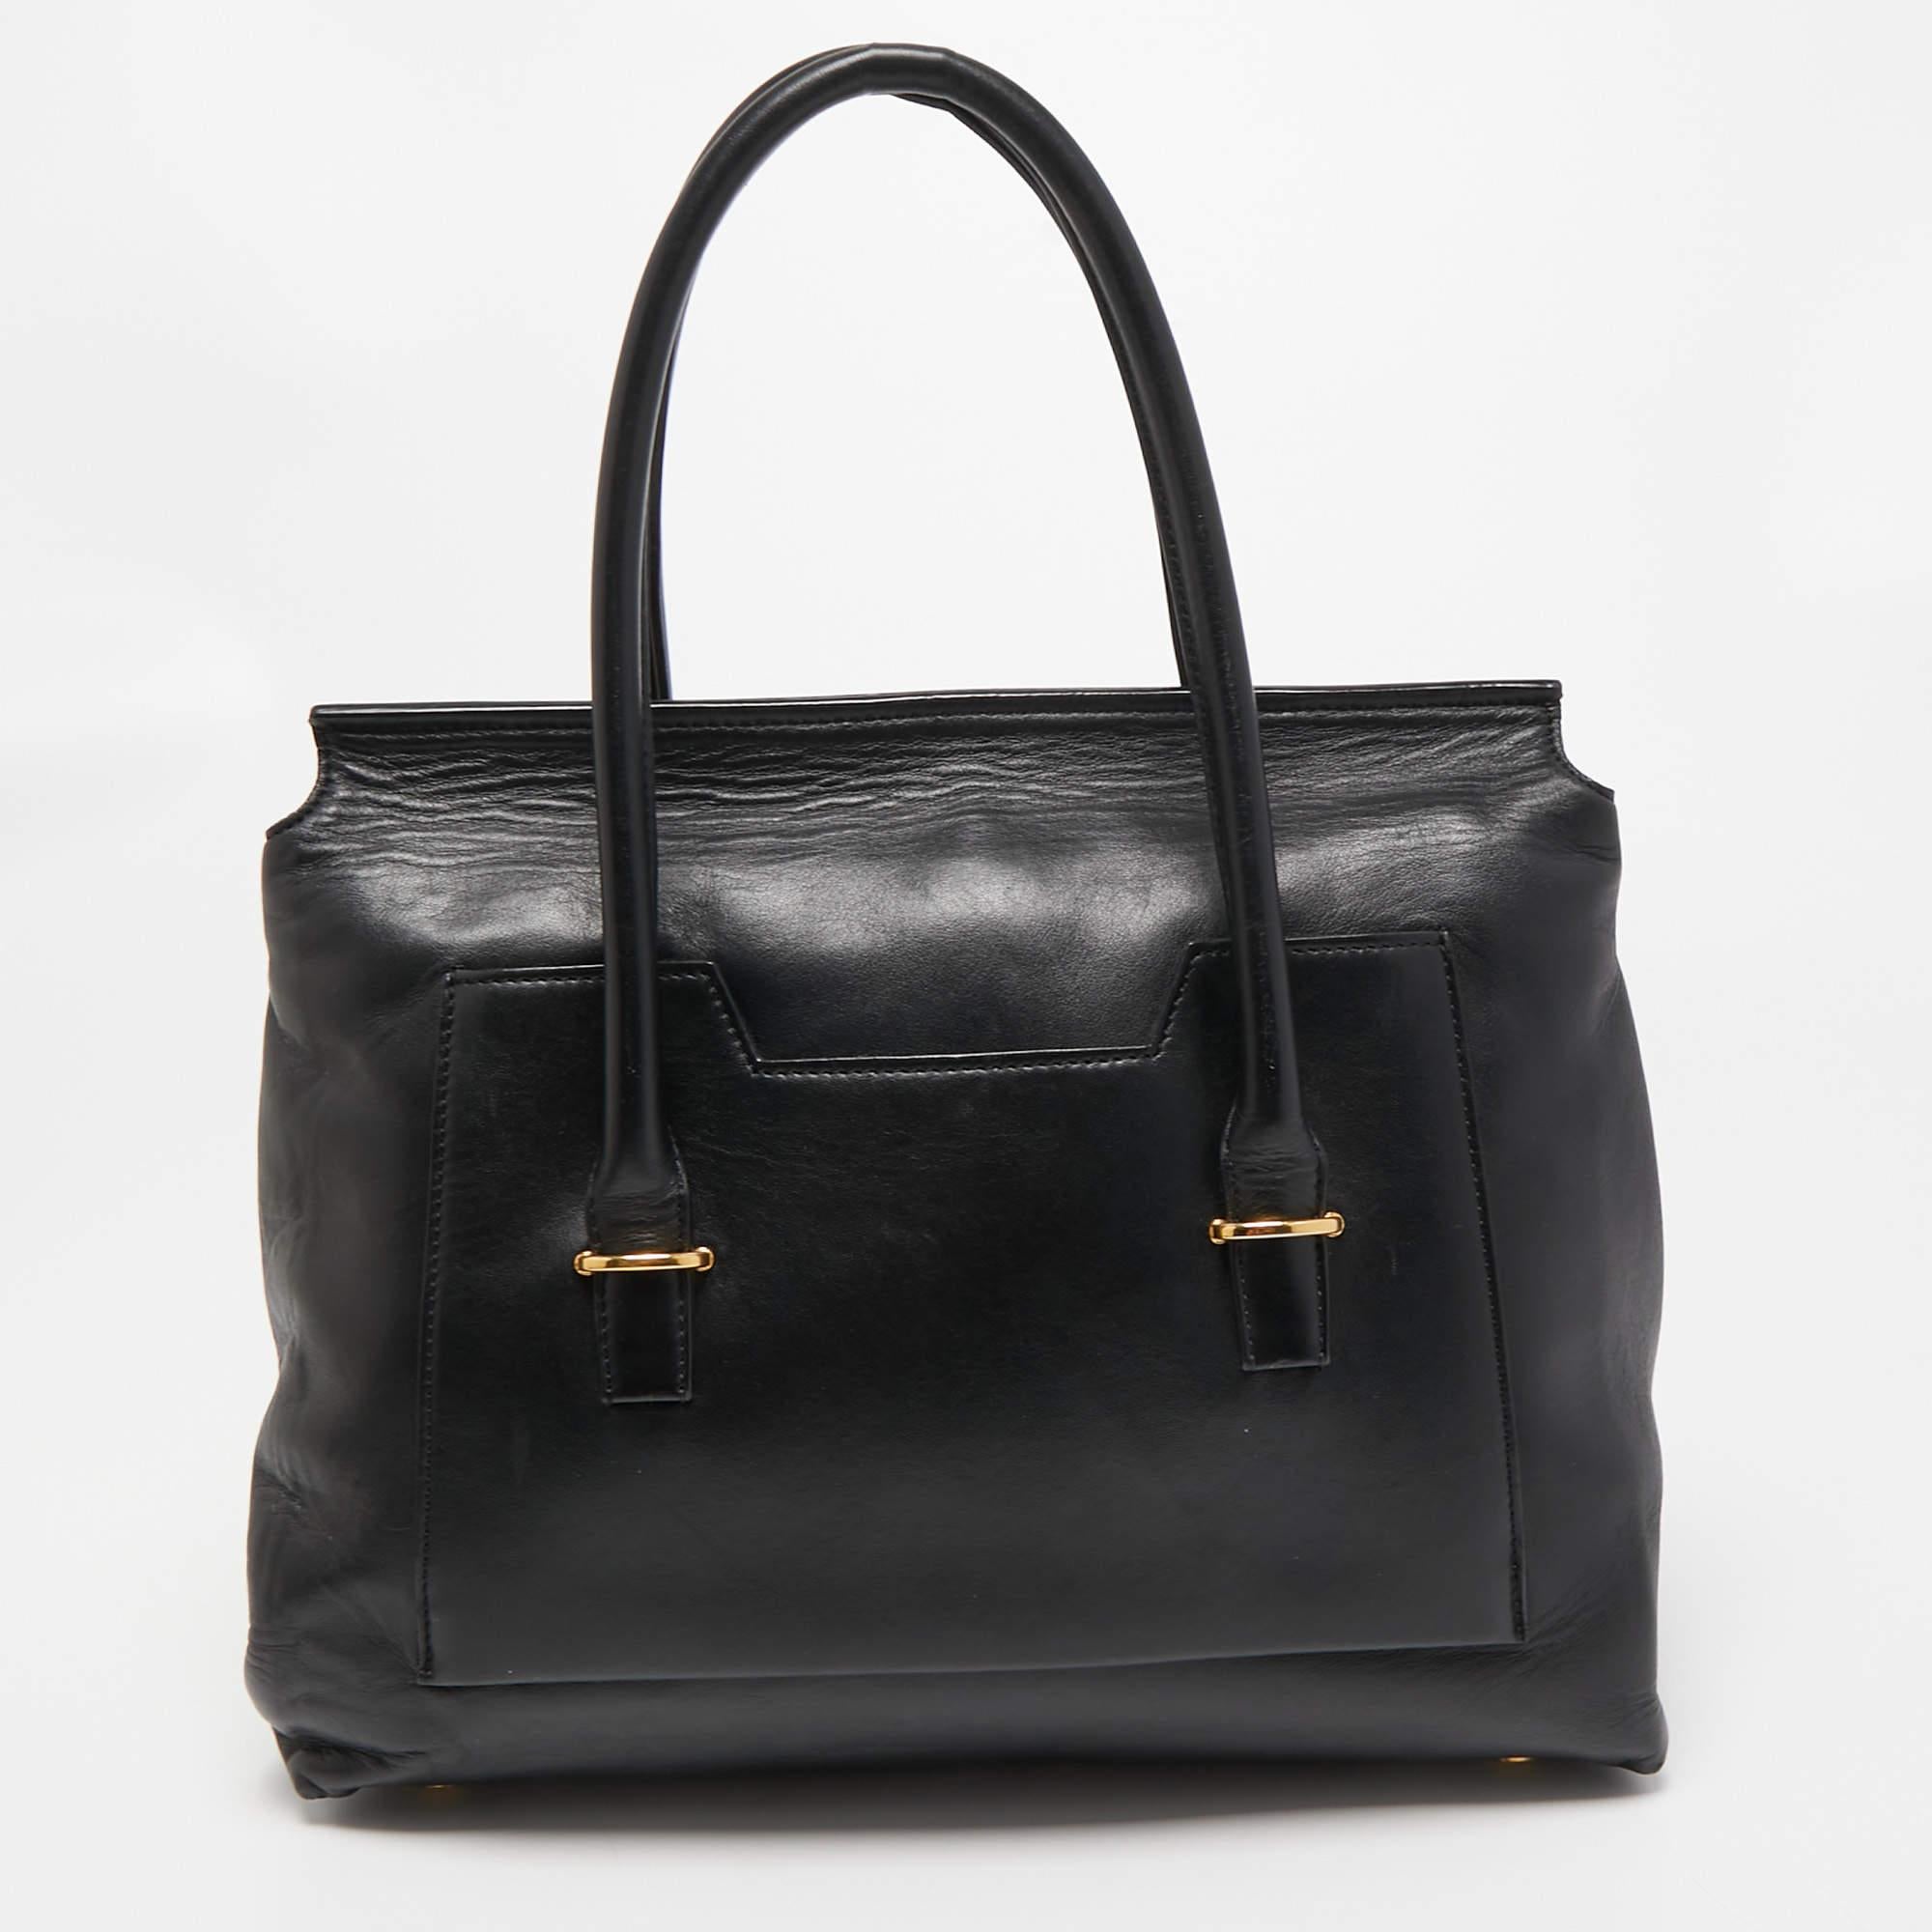 Tom Ford ensures you have a wonderful accessory to accompany you every day with this well-crafted bag. It has a signature look and a practical size.

